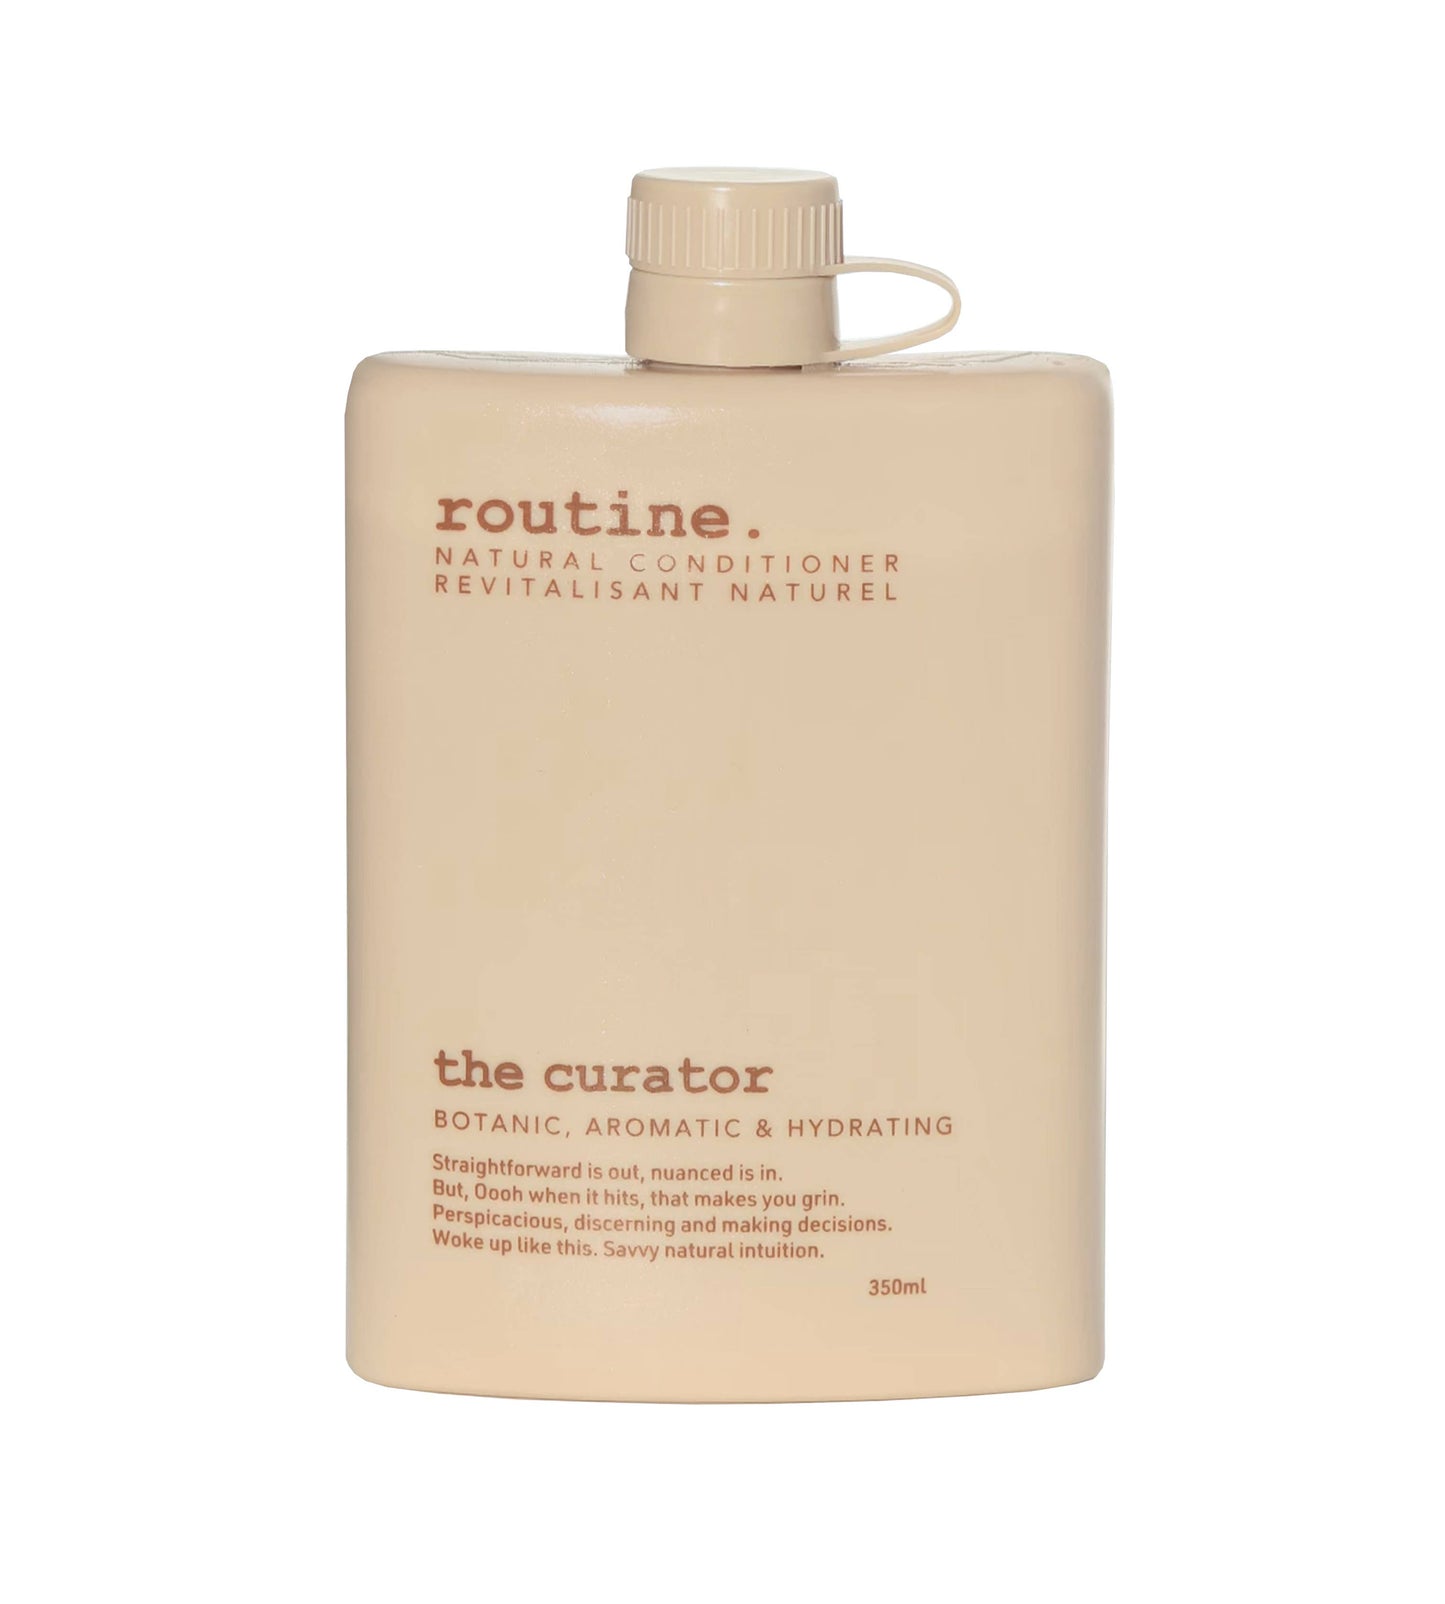 The Curator 350ml Natural Conditioner